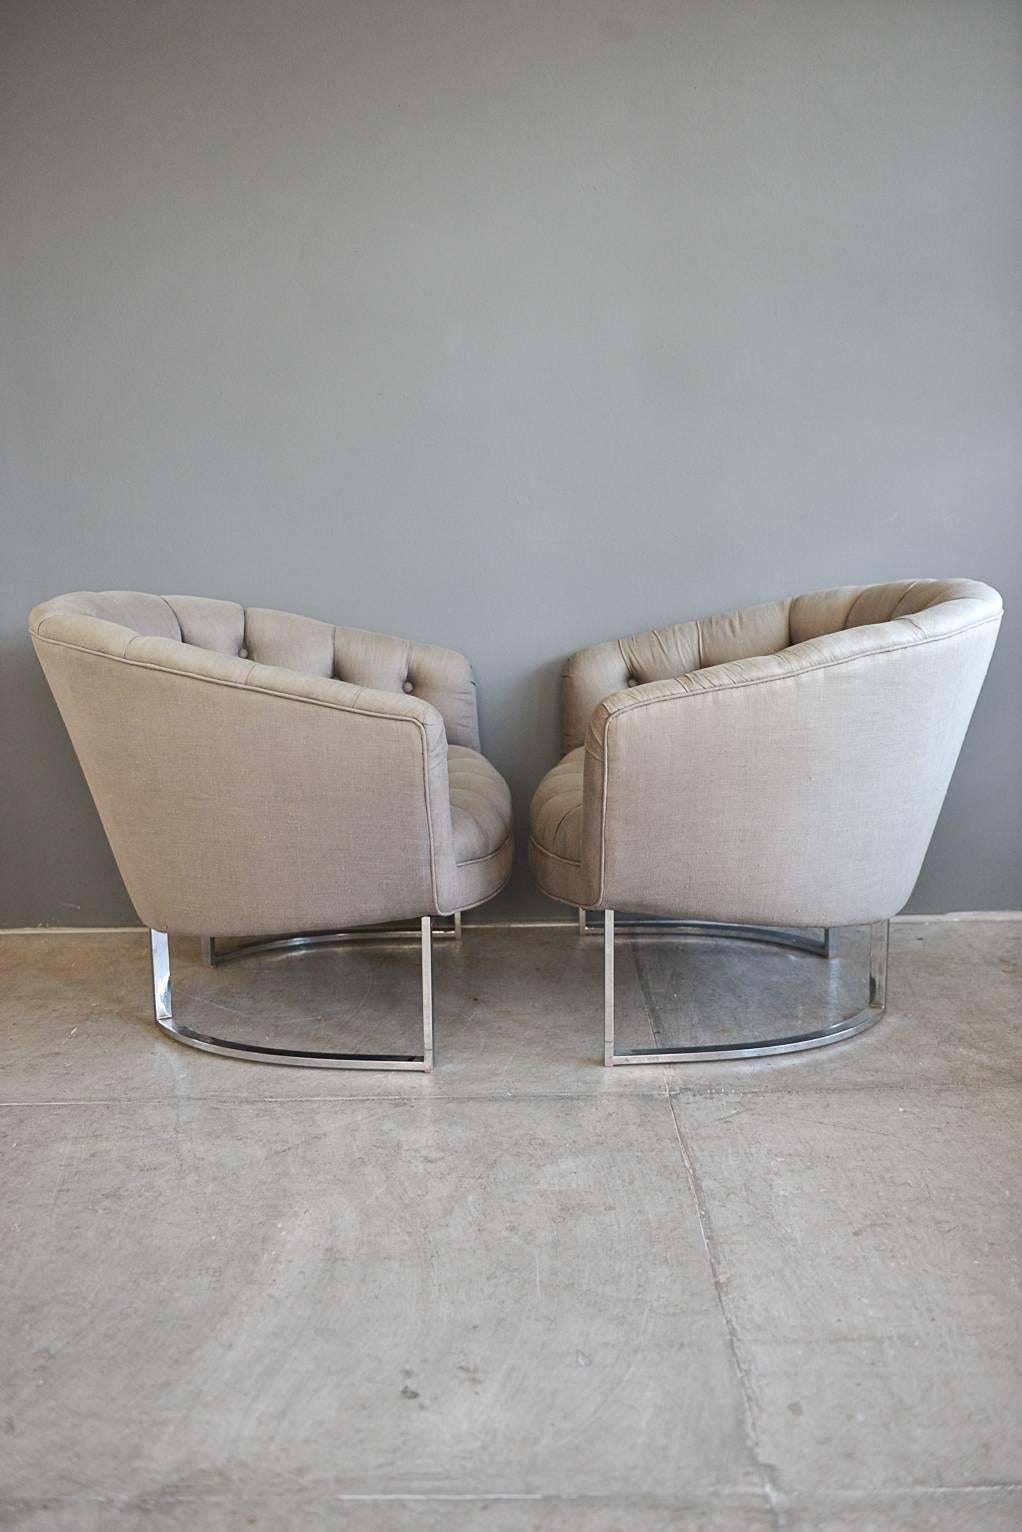 Elegant pair of Biscuit tufted bucket lounge chairs by Milo Baughman for Thayer Coggin, circa 1970s. Reupholstered in beautiful grey linen with deep biscuit tufting. Chrome bases are excellent with no rust. Original floor protectors. Works well with